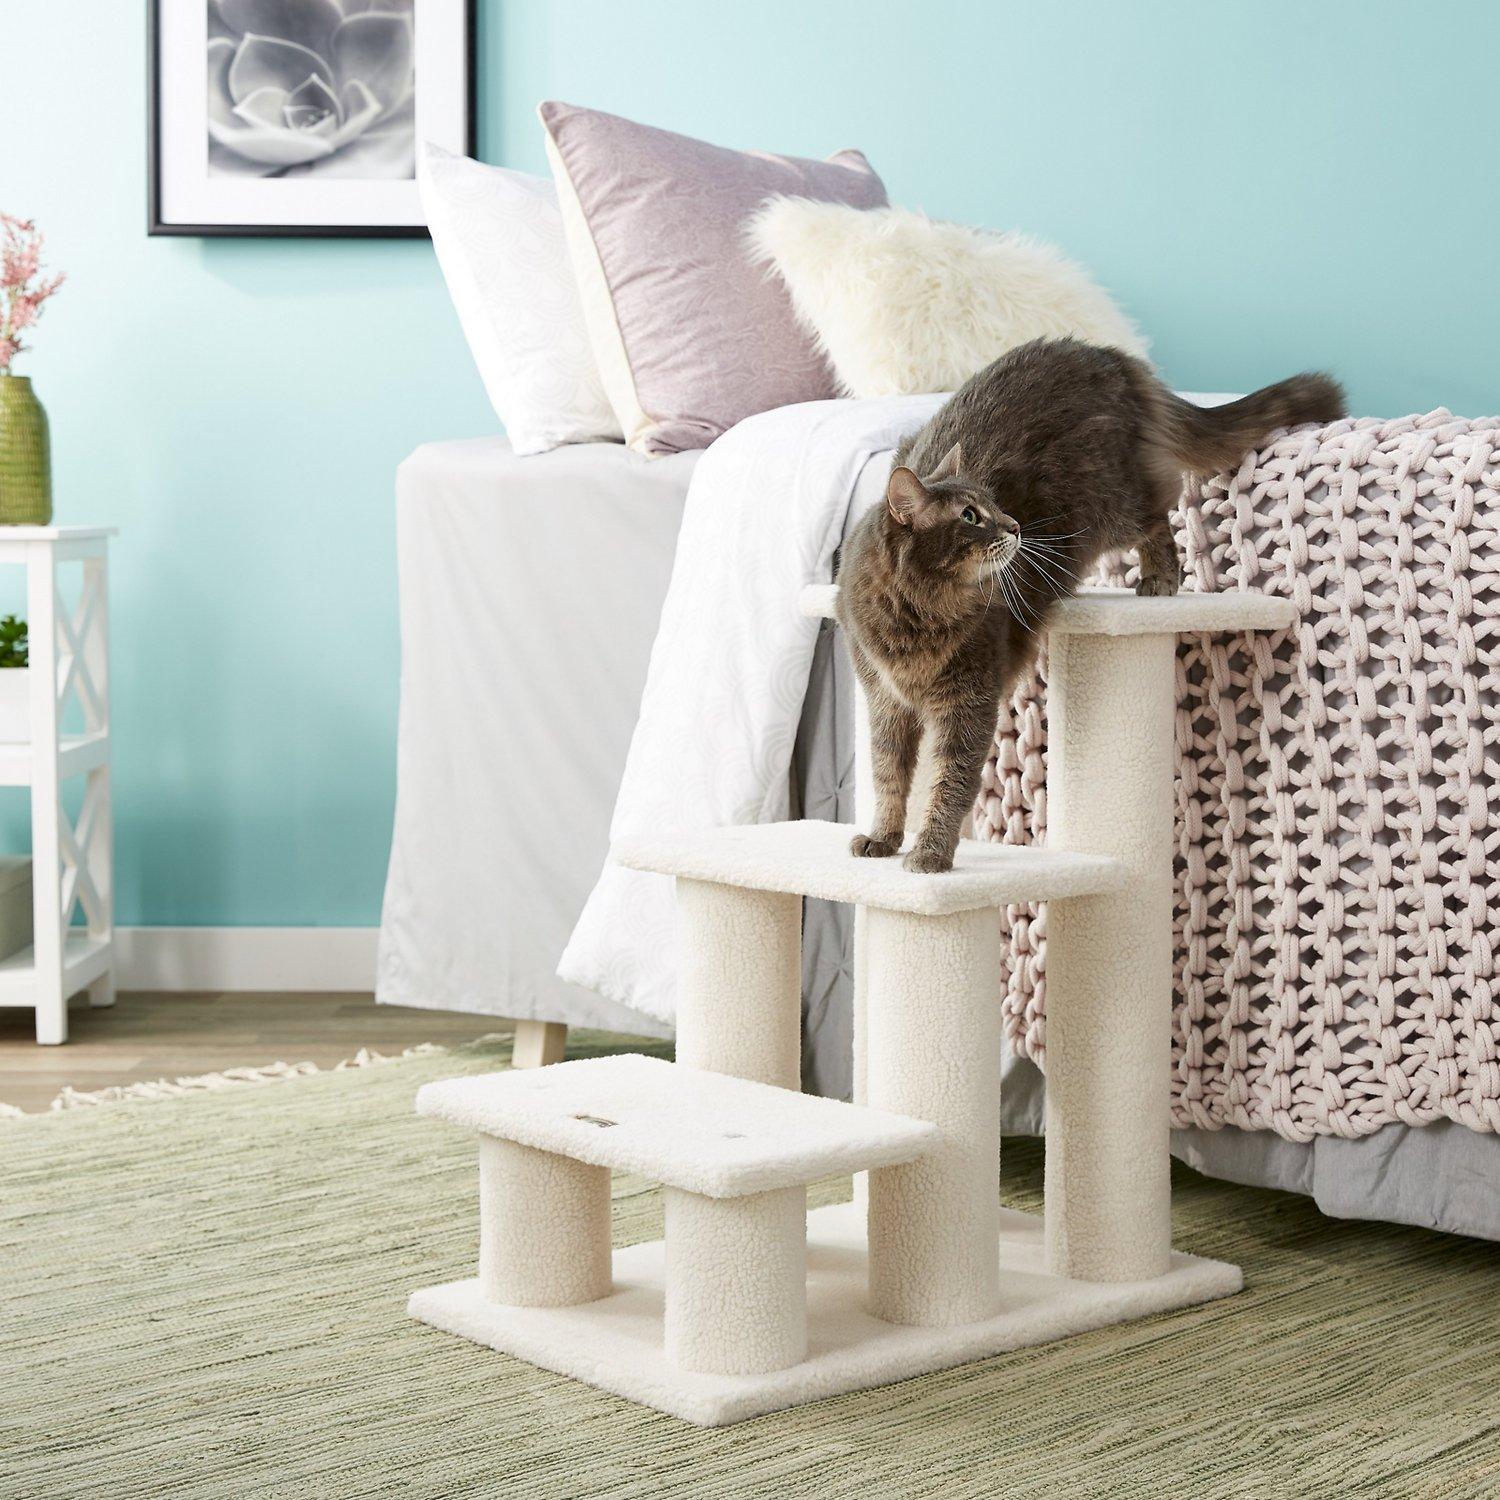 Armarkat 3-Step Pet Steps for $24.24 Shipped